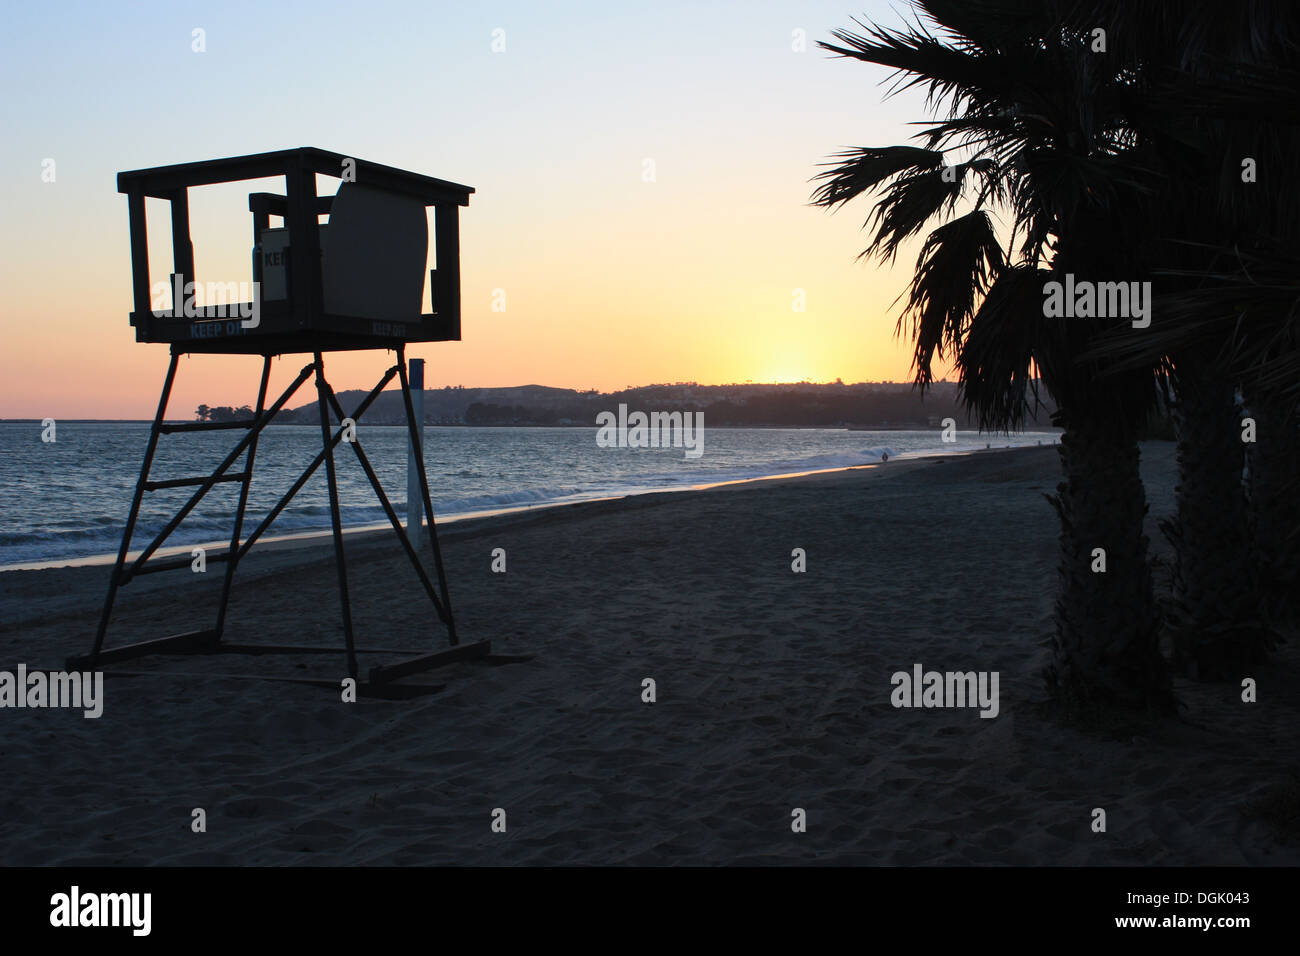 Sun setting over Dana Point beach with palm tree and lifeguard tower in Southern California Stock Photo